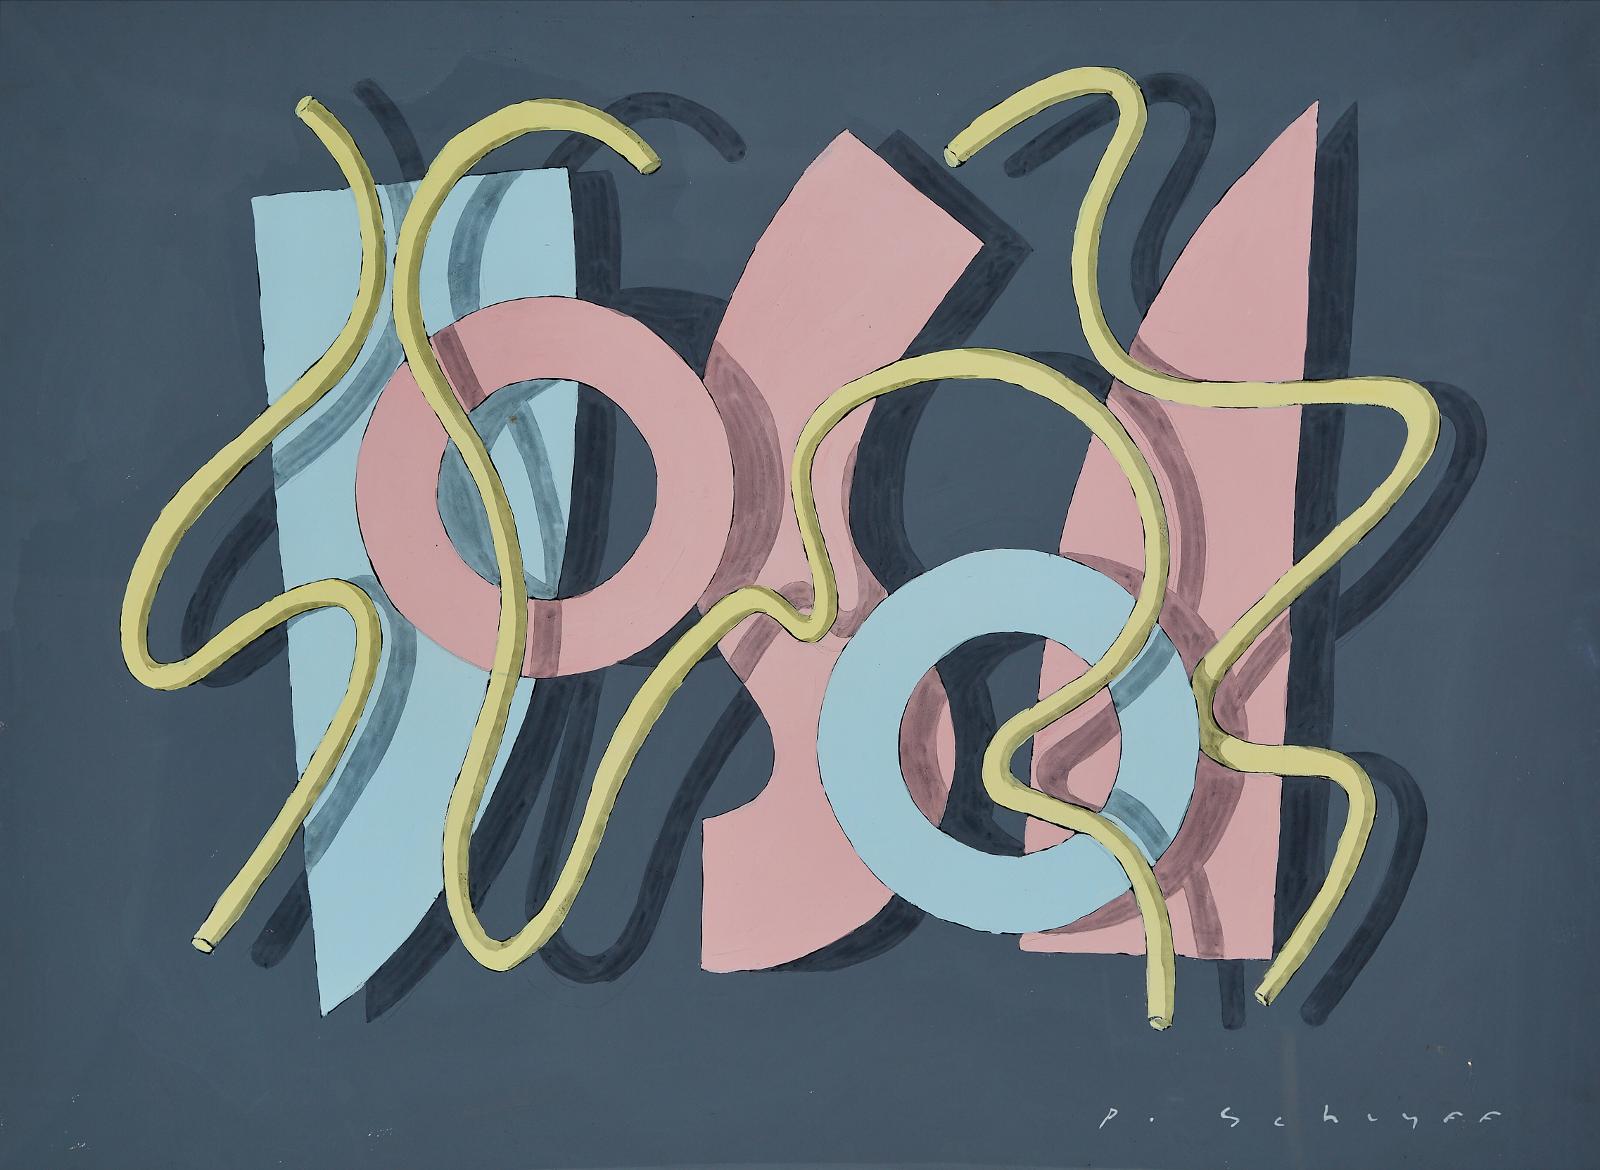 Peter Schuyff (1958) - Untitled (Melody Of Interwoven Ribbons And Letters)